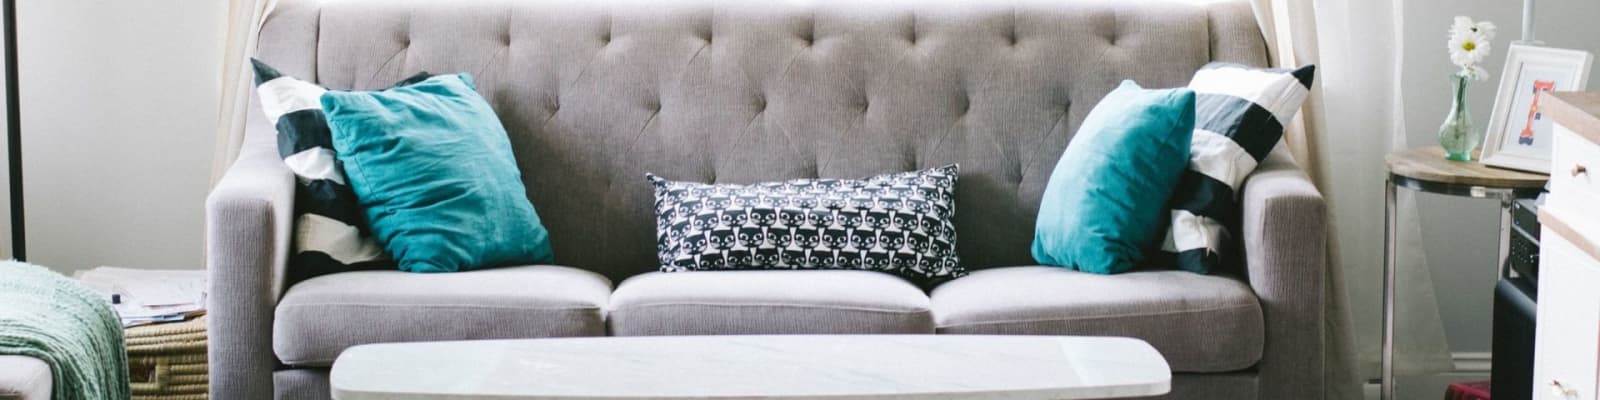 upholstery cleaning pros in Durban